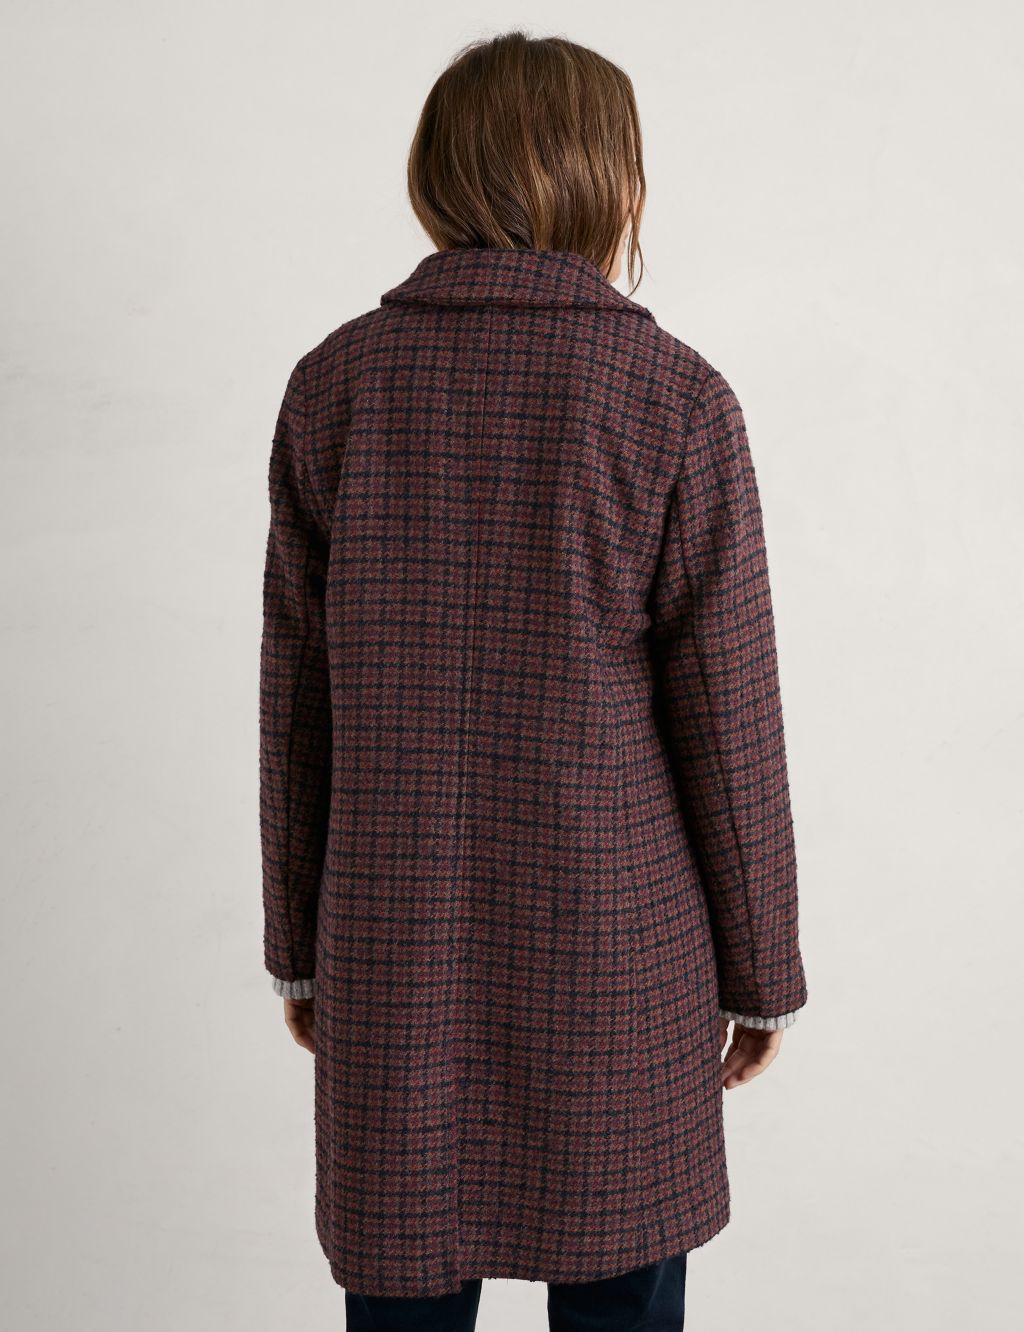 Wool Blend Checked Collared Coat image 3